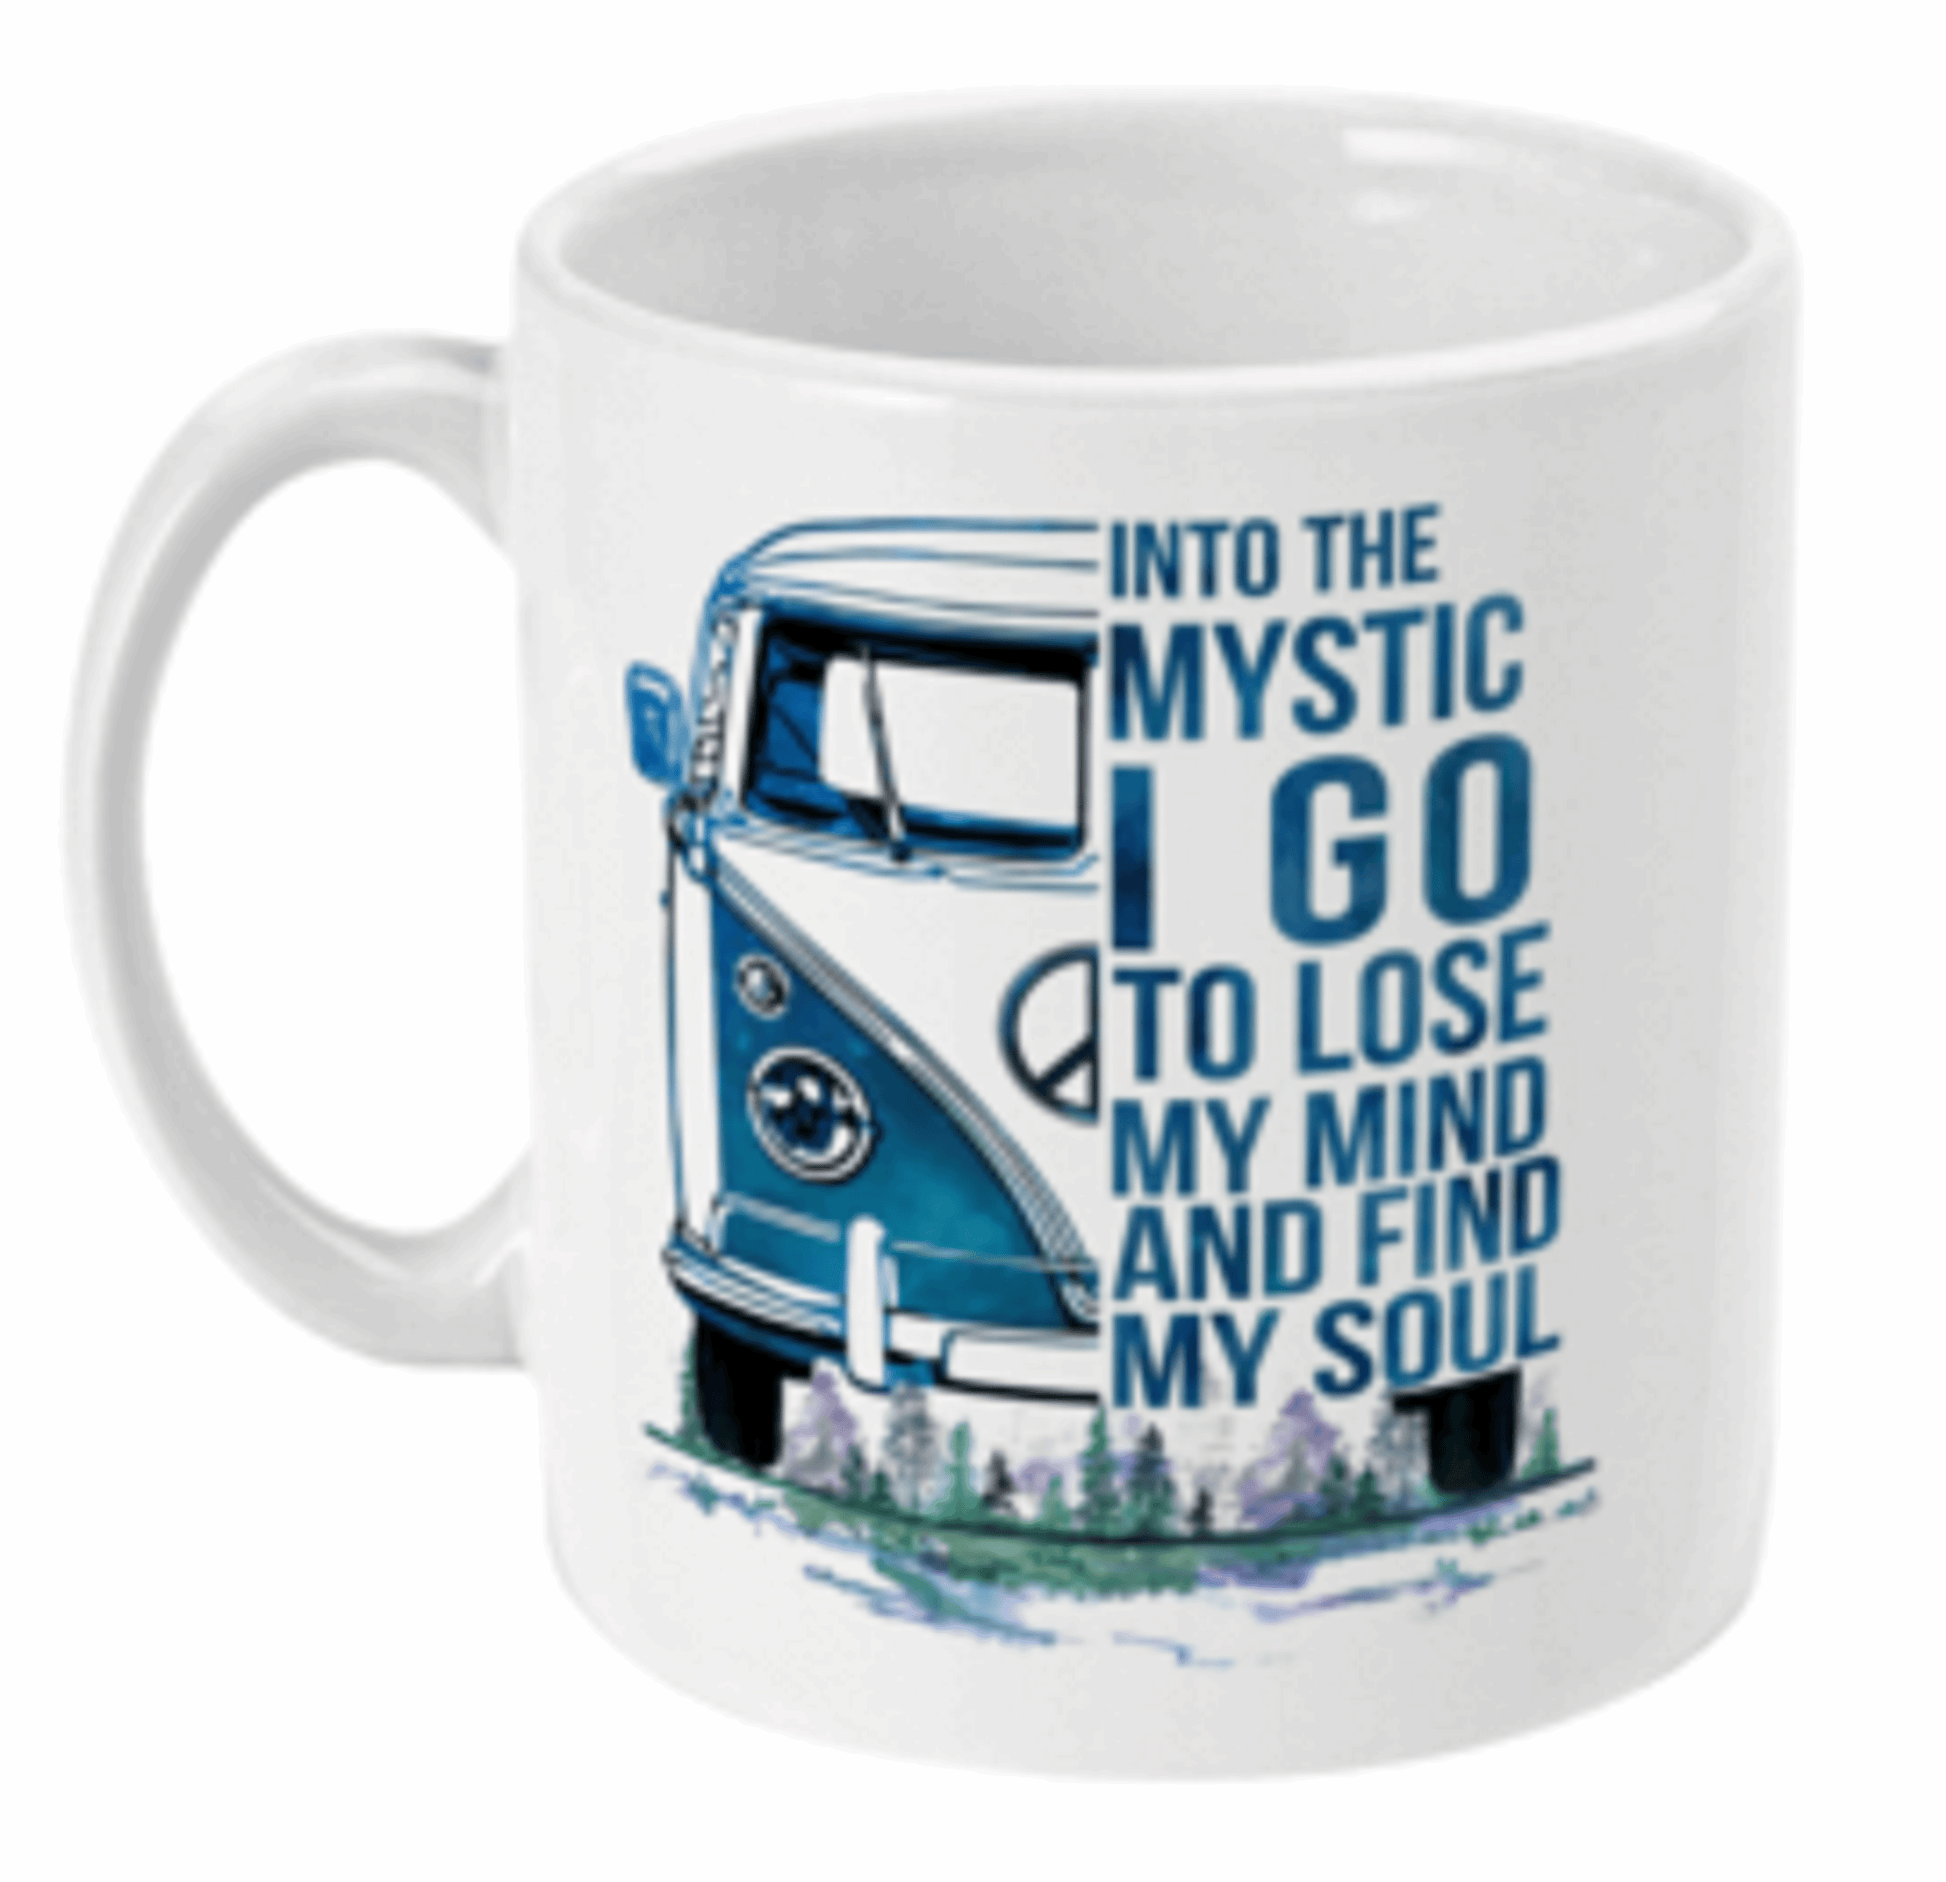  Into the Mystic I Go Camper Van Coffee Mug by Free Spirit Accessories sold by Free Spirit Accessories